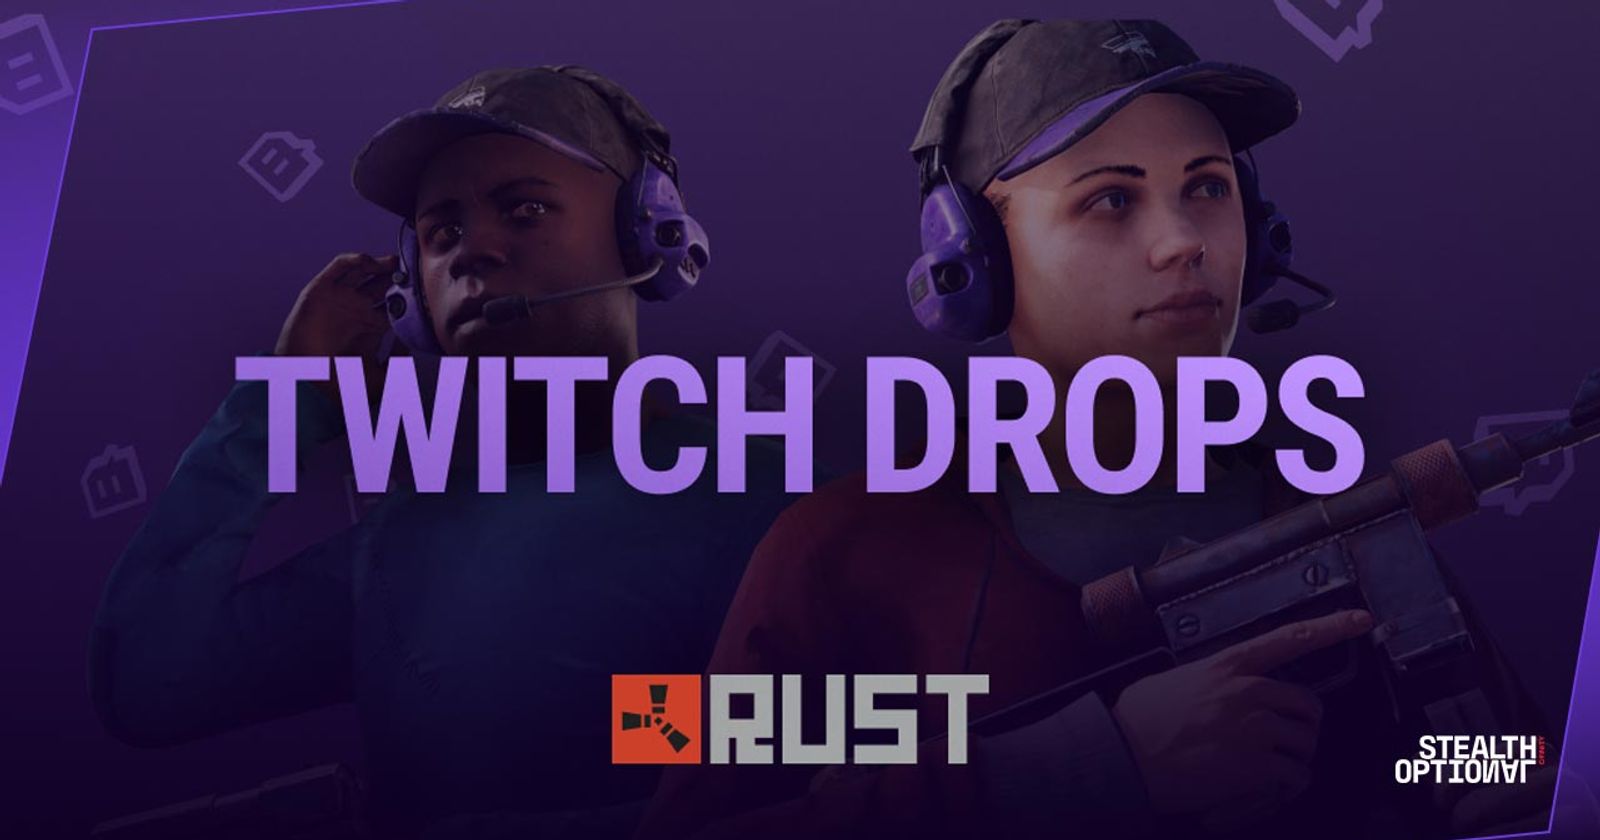  28 ROUND  16/16 unique skins  TWITCH DROPS  INSTANT DELIVERY 